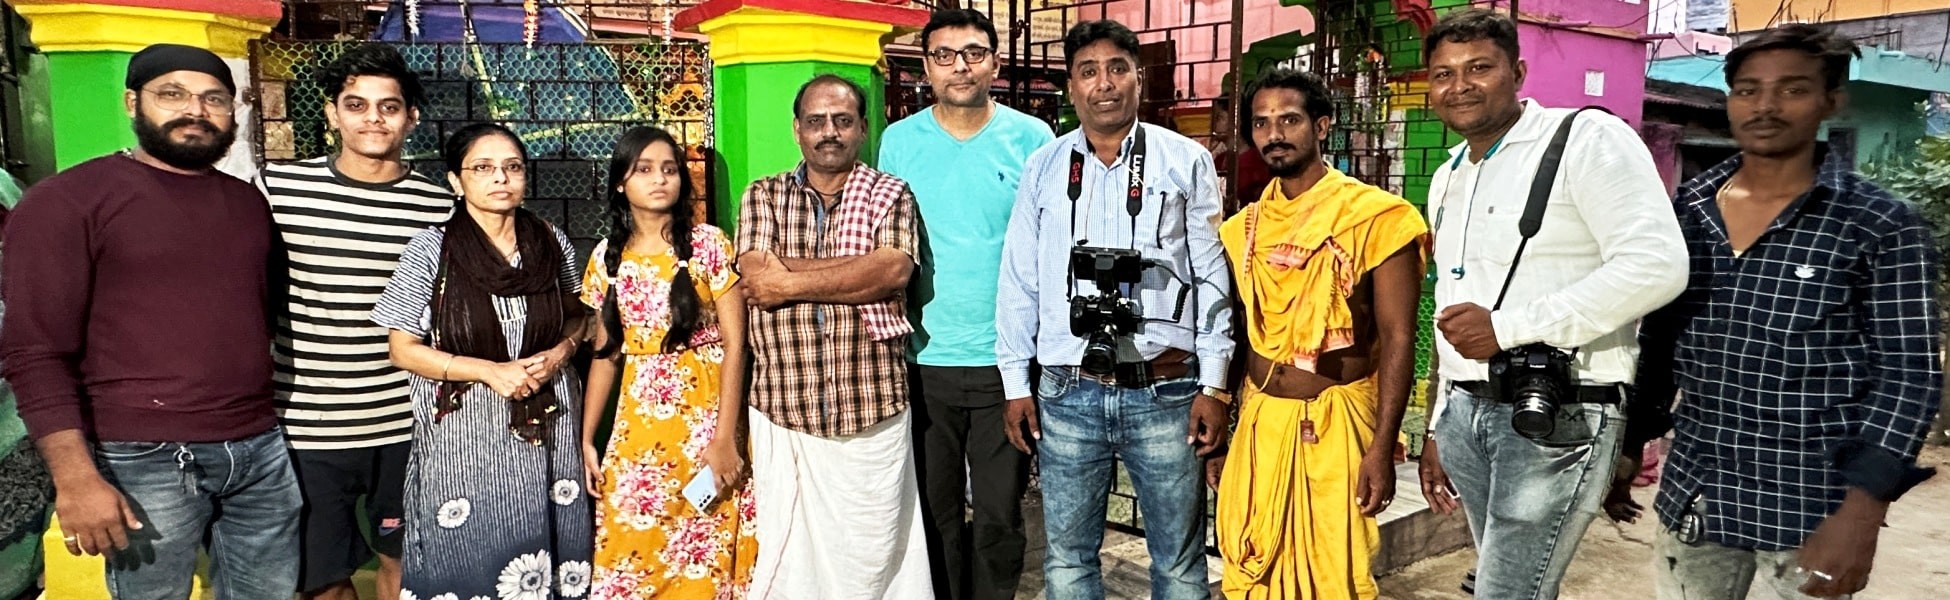 short film production house in india, short film production company in india